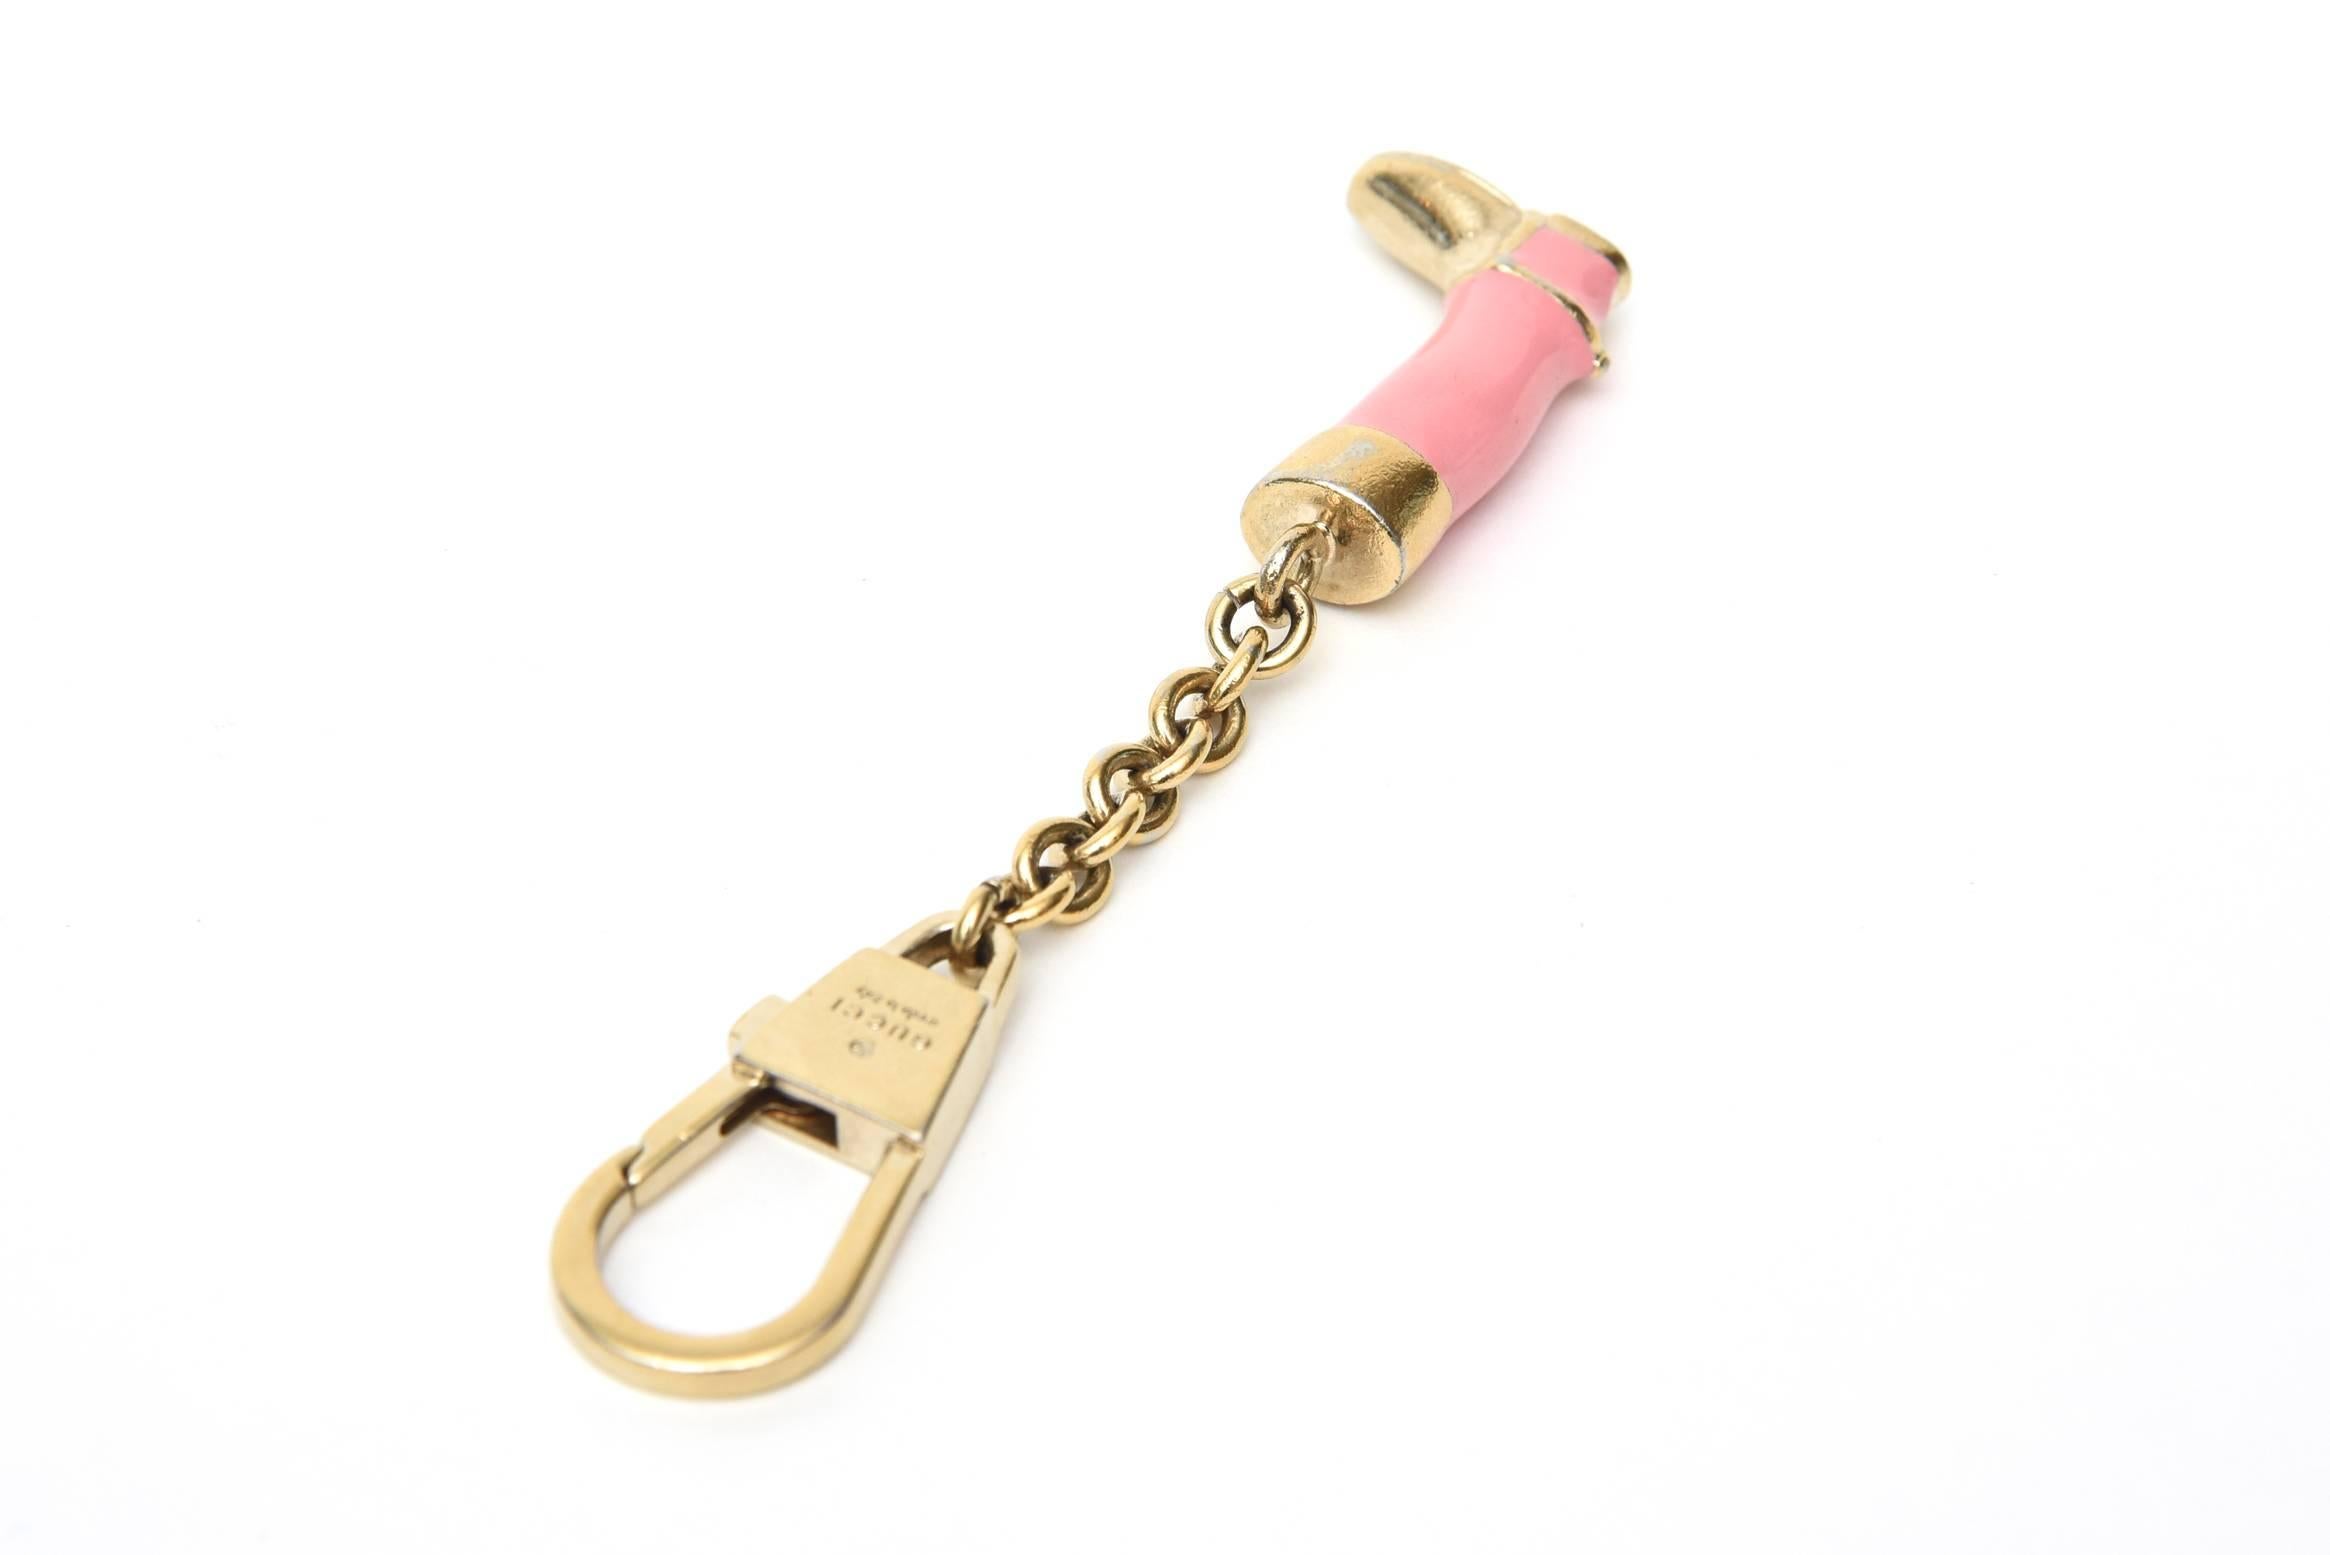  Gucci Signed Vintage Pink Enamel and Brass Plate Stirrup Boot Key Chain  In Good Condition For Sale In North Miami, FL